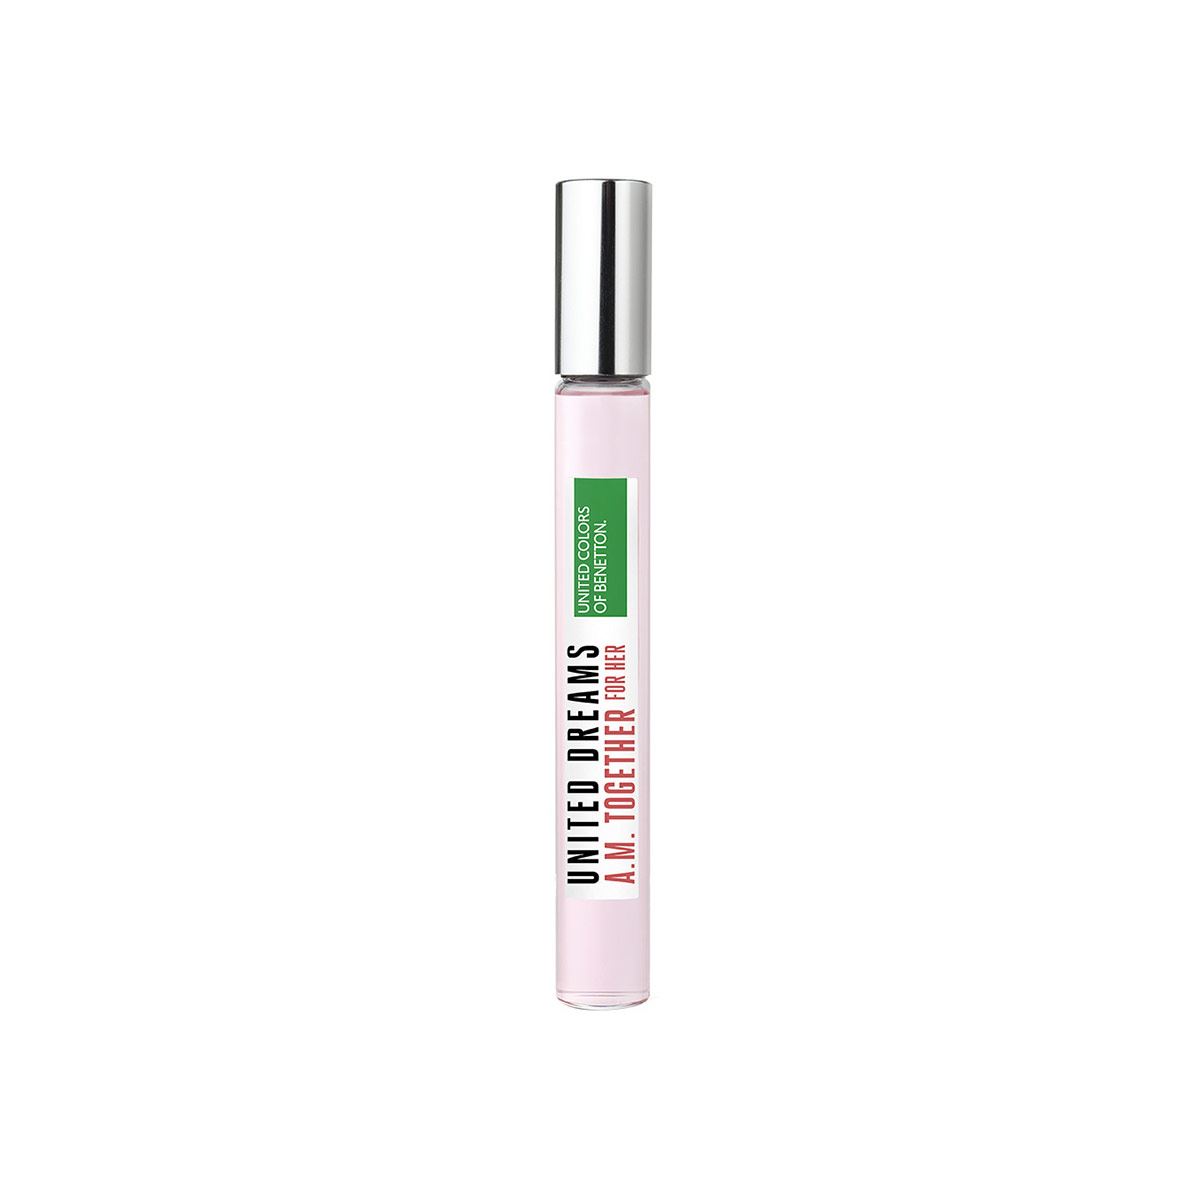 Fragancia Para Dama , Benetton, United Dreams Together for her, EDT 80 ML + 2 boosters 10ML